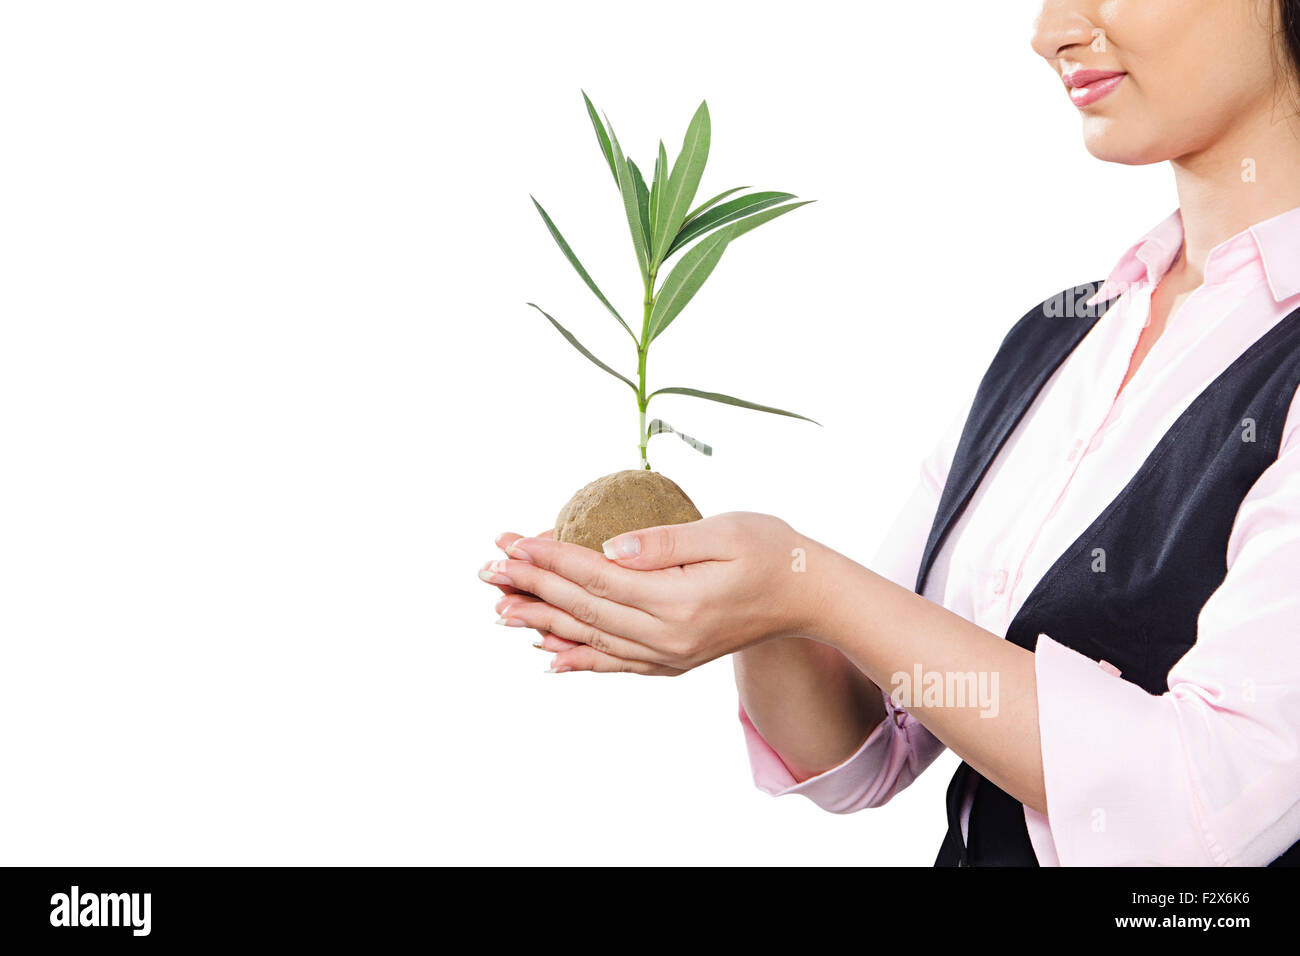 1 indian Business Woman Safety Plant-life Stock Photo